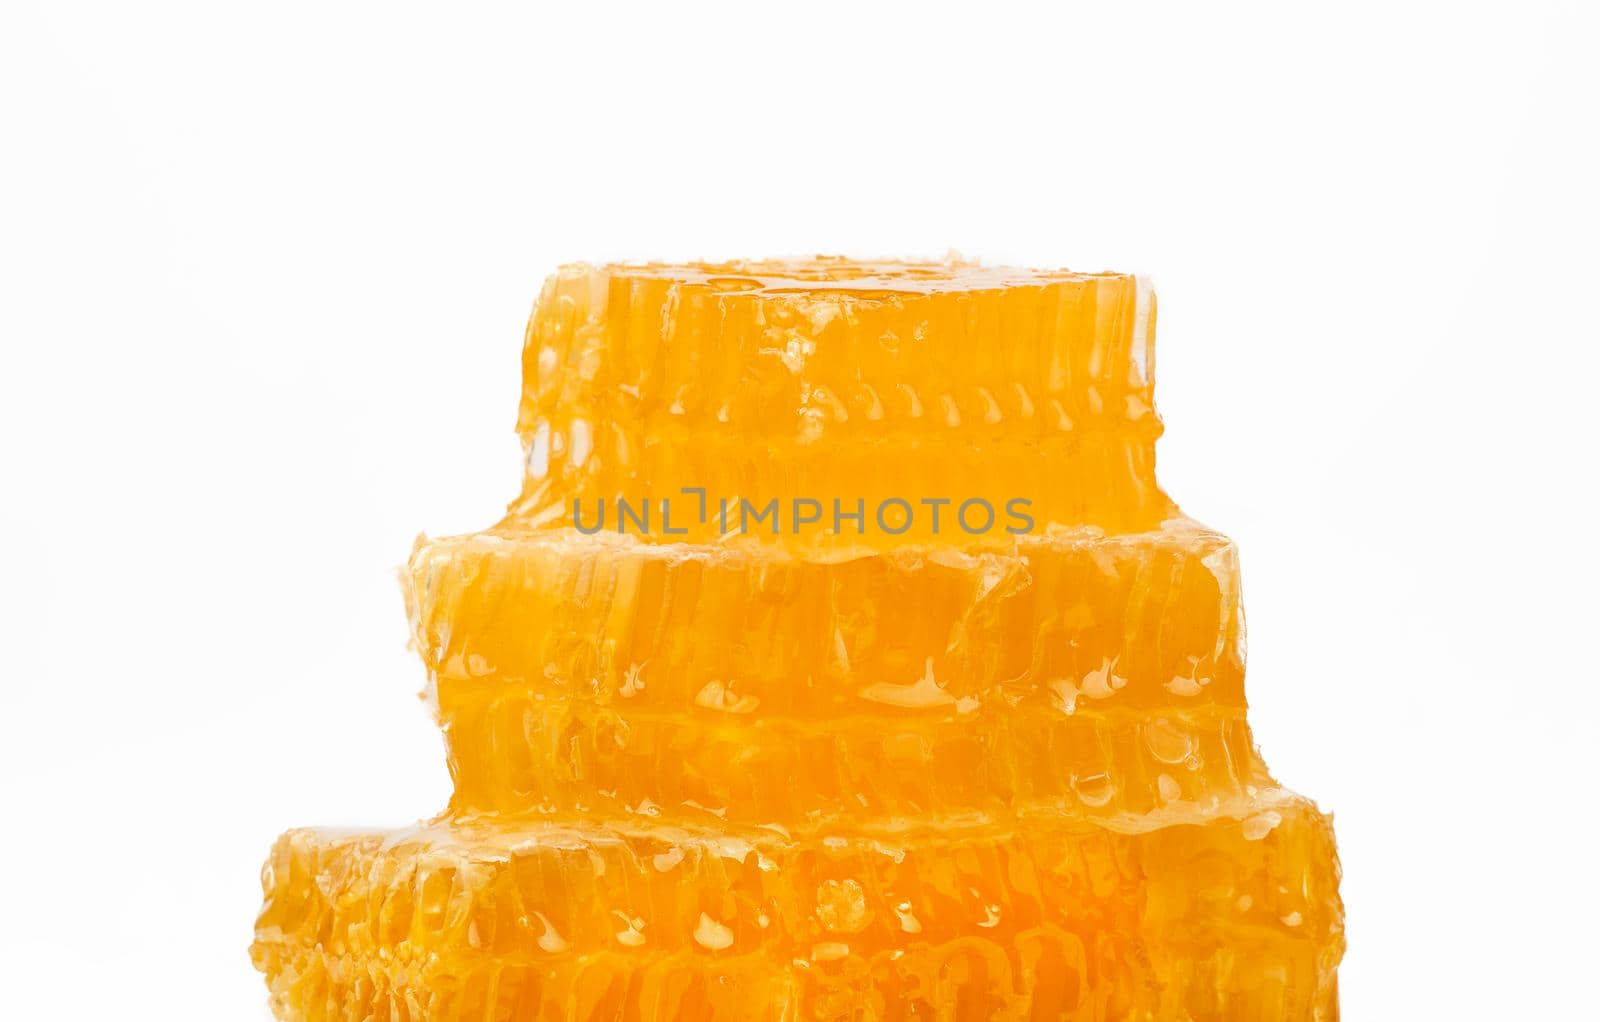 Close up stack of several fresh cut golden comb honey slices on plate isolated on white background, low angle, side view